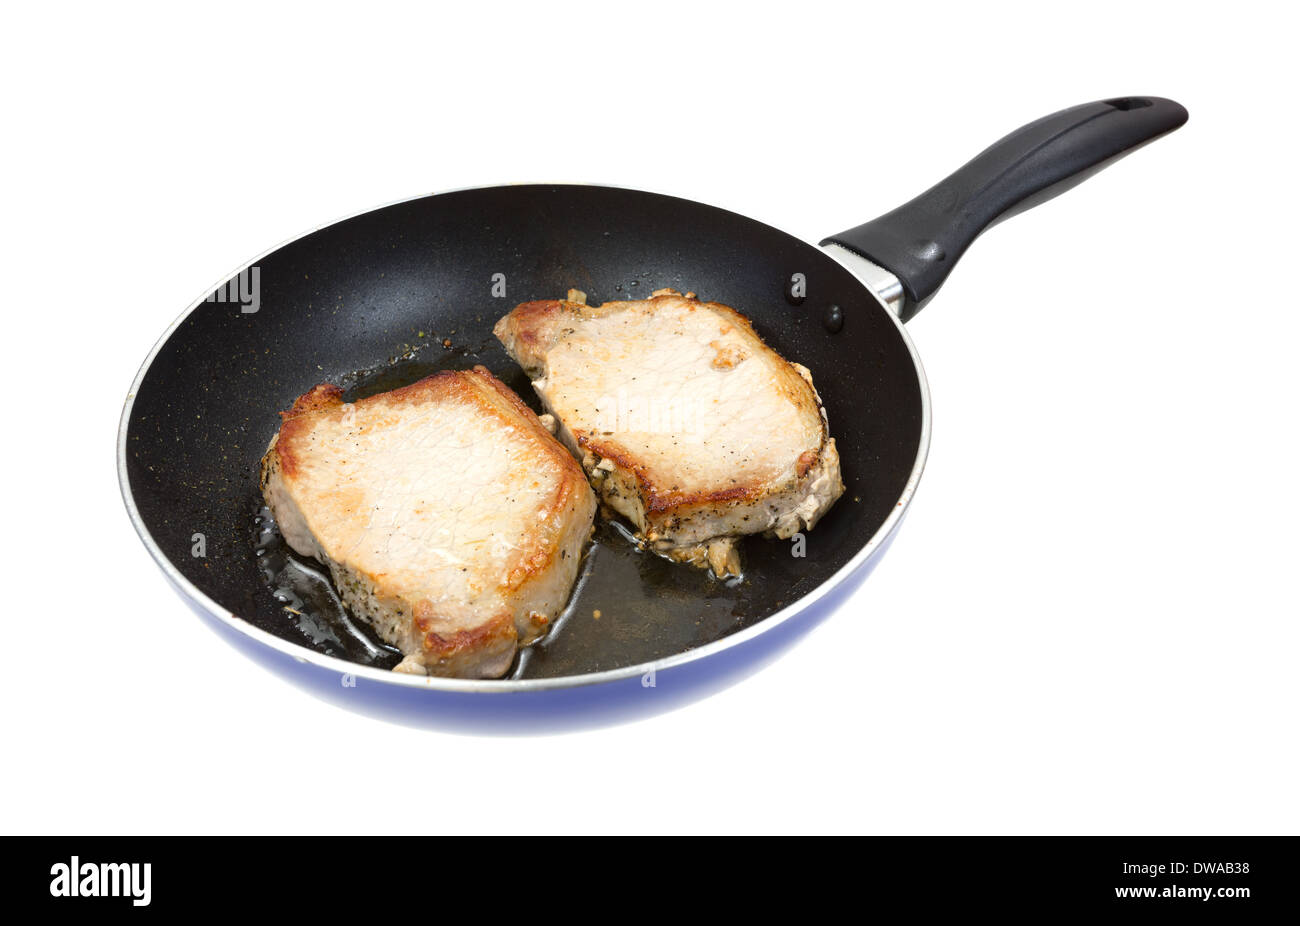 Two pork loin steaks frying in a skillet on a white background. Stock Photo